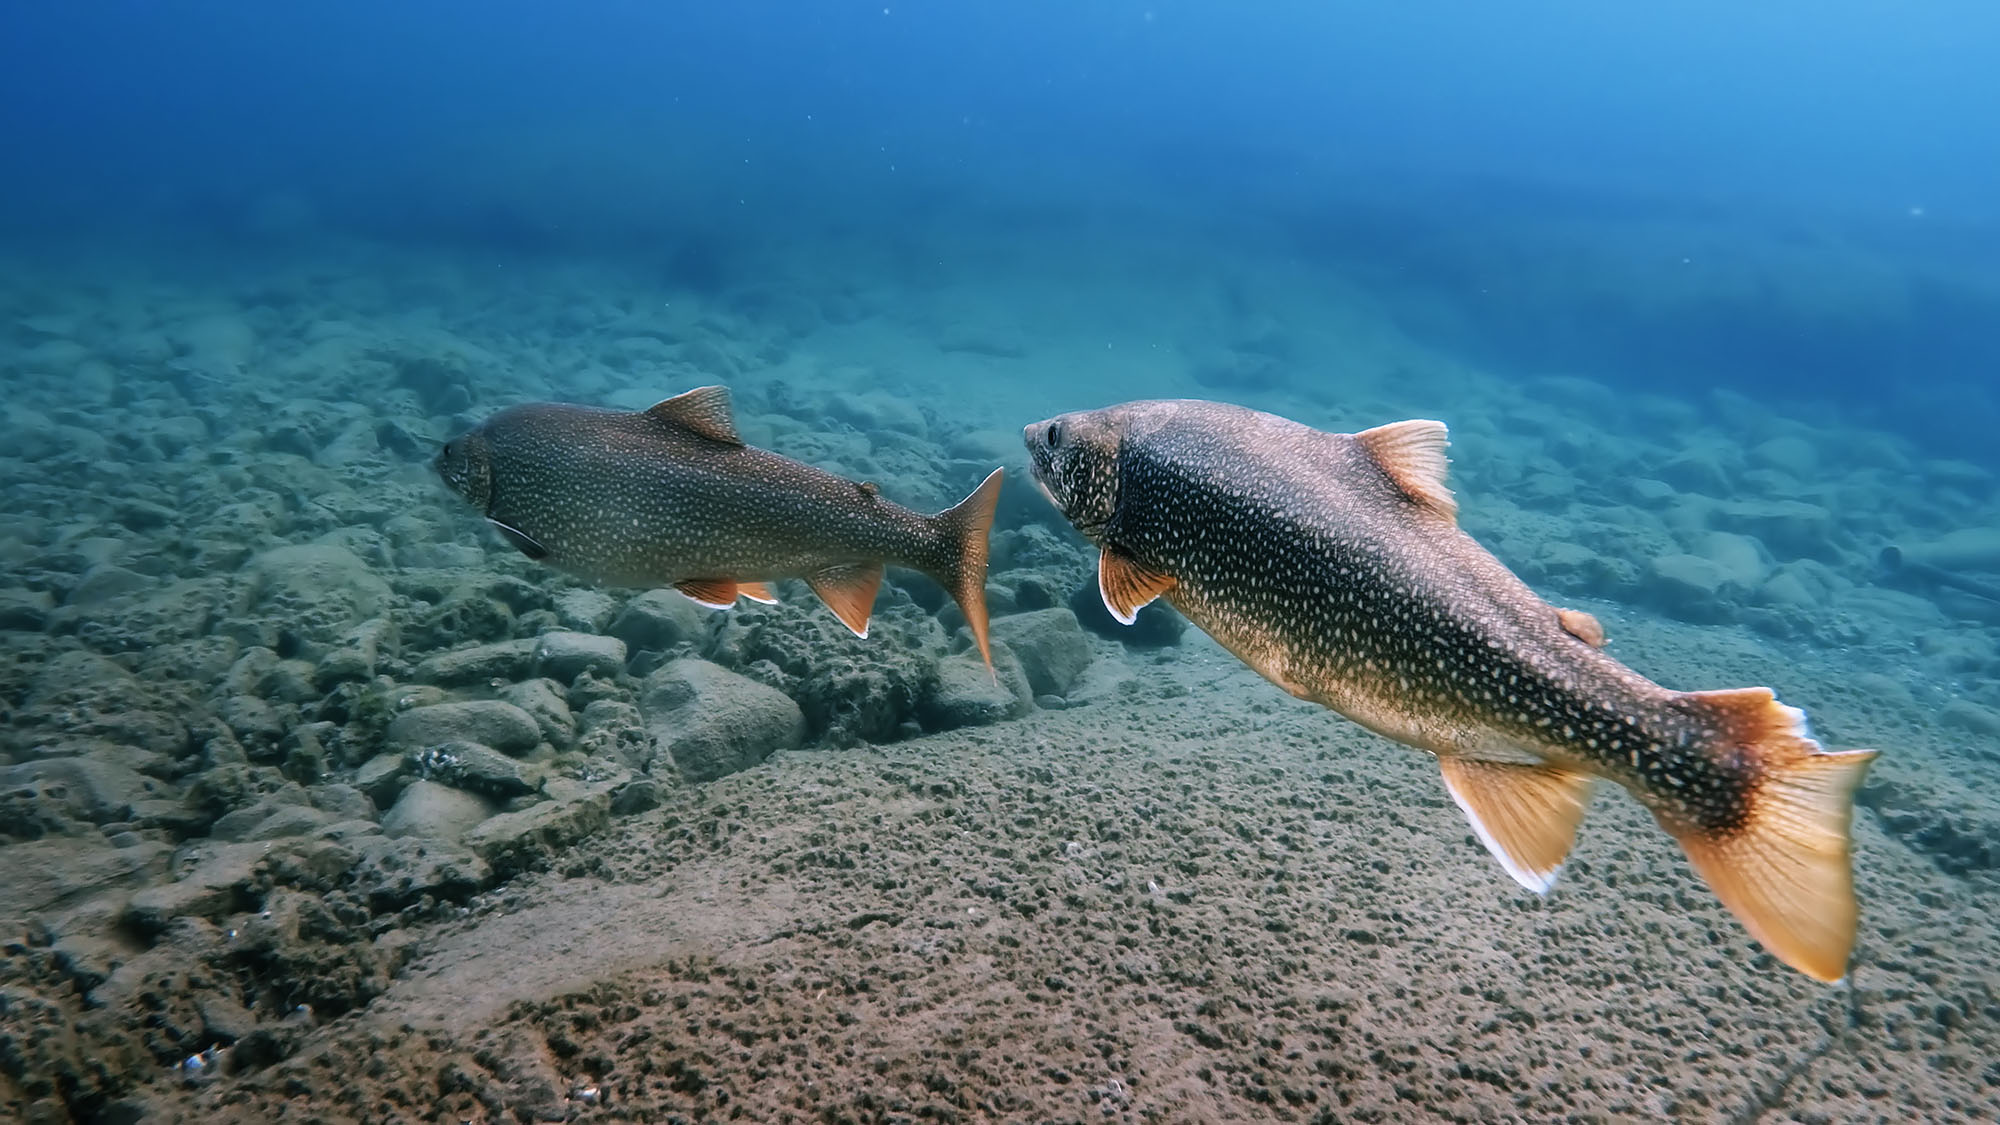 Great Lakes Documentary - Lake Trout Shot with Boxfish Luna ROV. Photo Credit: Inspired Planet Productions